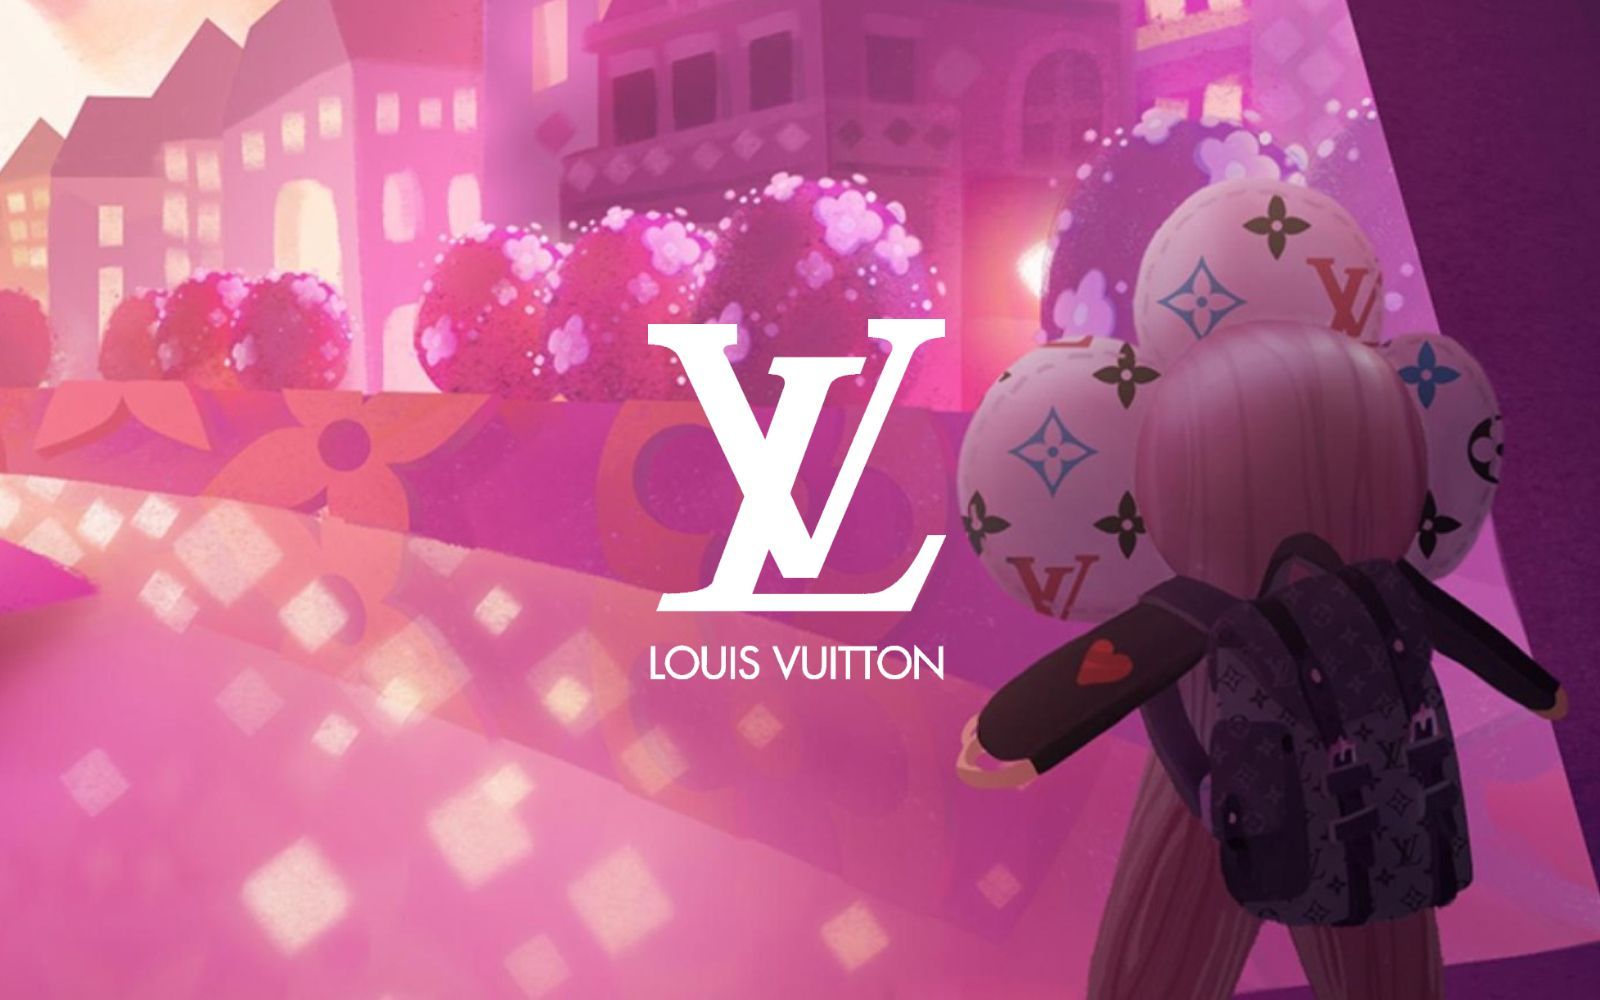 Louis Vuitton Images  Photos, videos, logos, illustrations and